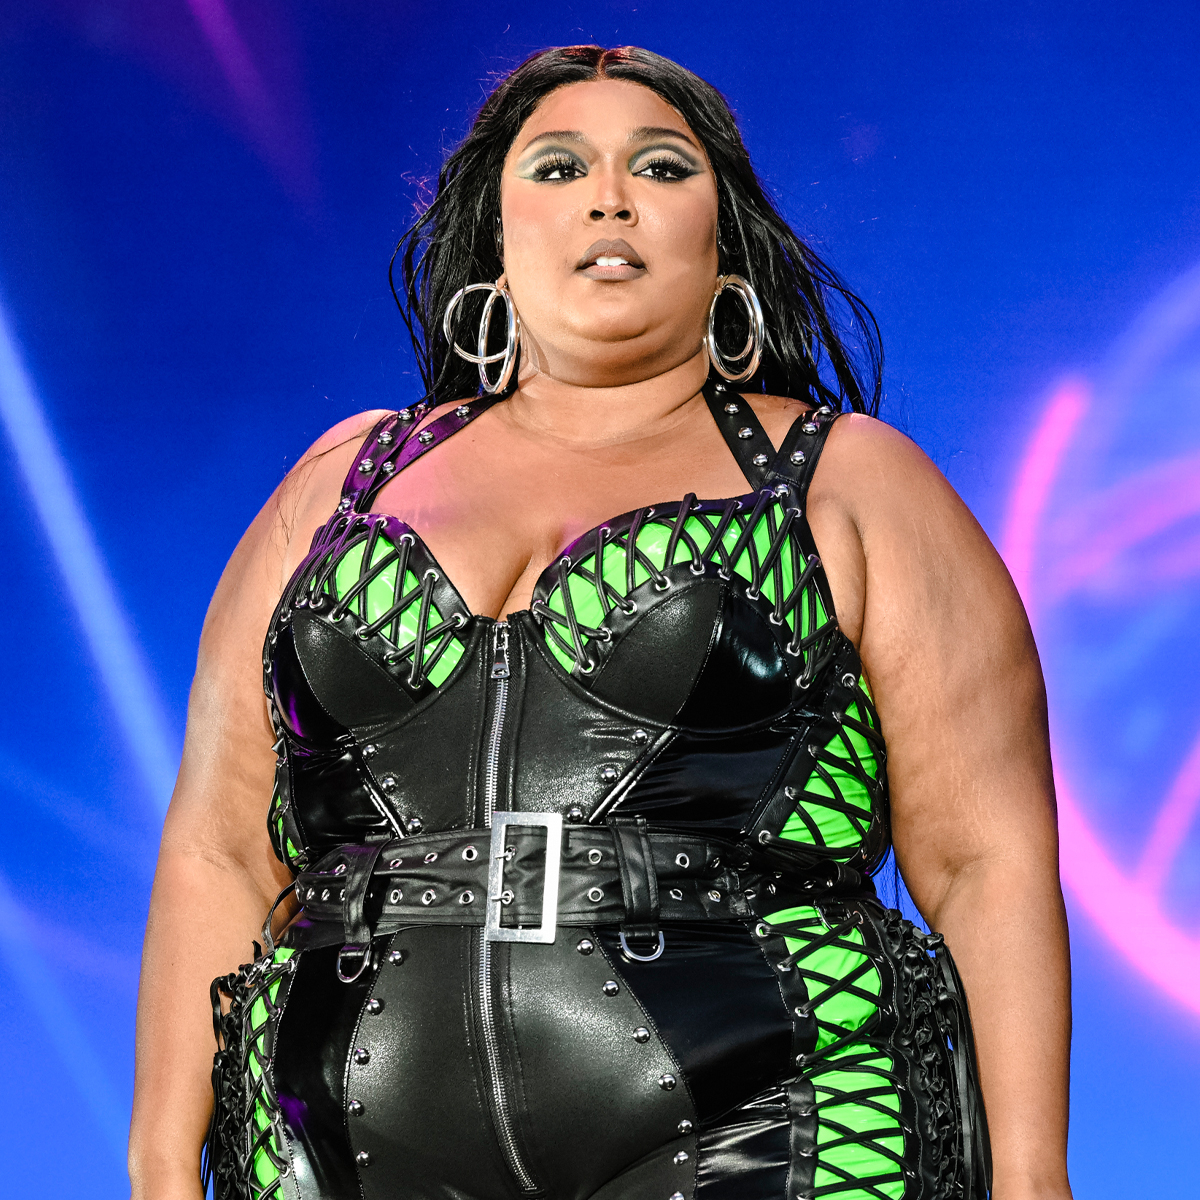 Lizzo used the Super Bowl to hard-launch a new look! We've got more pics of  her bold new hair color and cut over at JustJared.com! #Liz